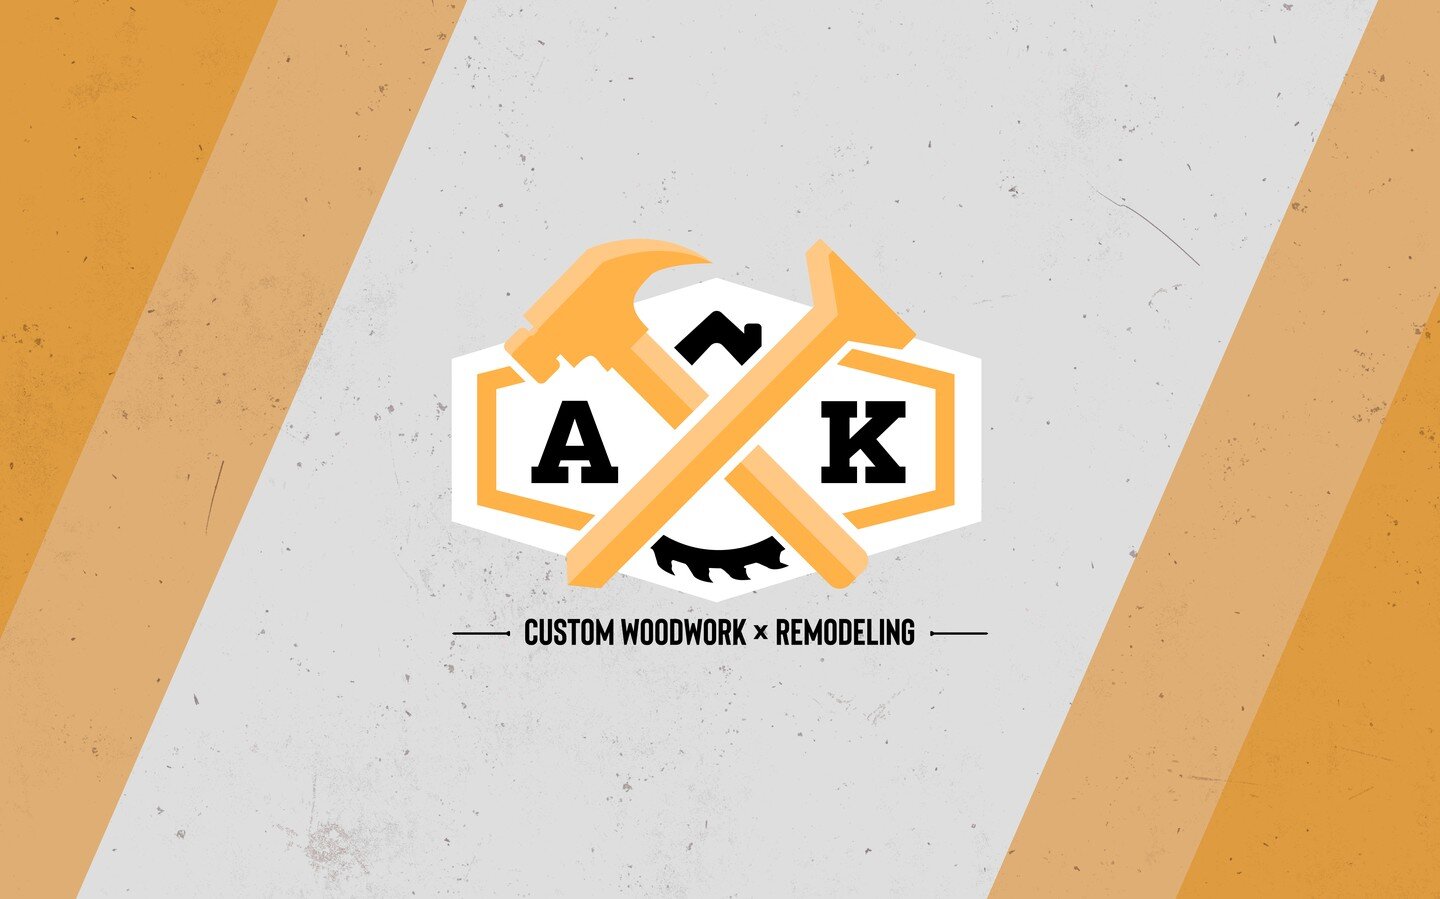 AK Woodwork &amp; Remodeling Brand Identity

-

In mid-2020 I was given the opportunity to create the brand identity for a local woodwork &amp; remodeling business. The final result is a clean, modern and iconic look and feel.

-

#logo #design #grap